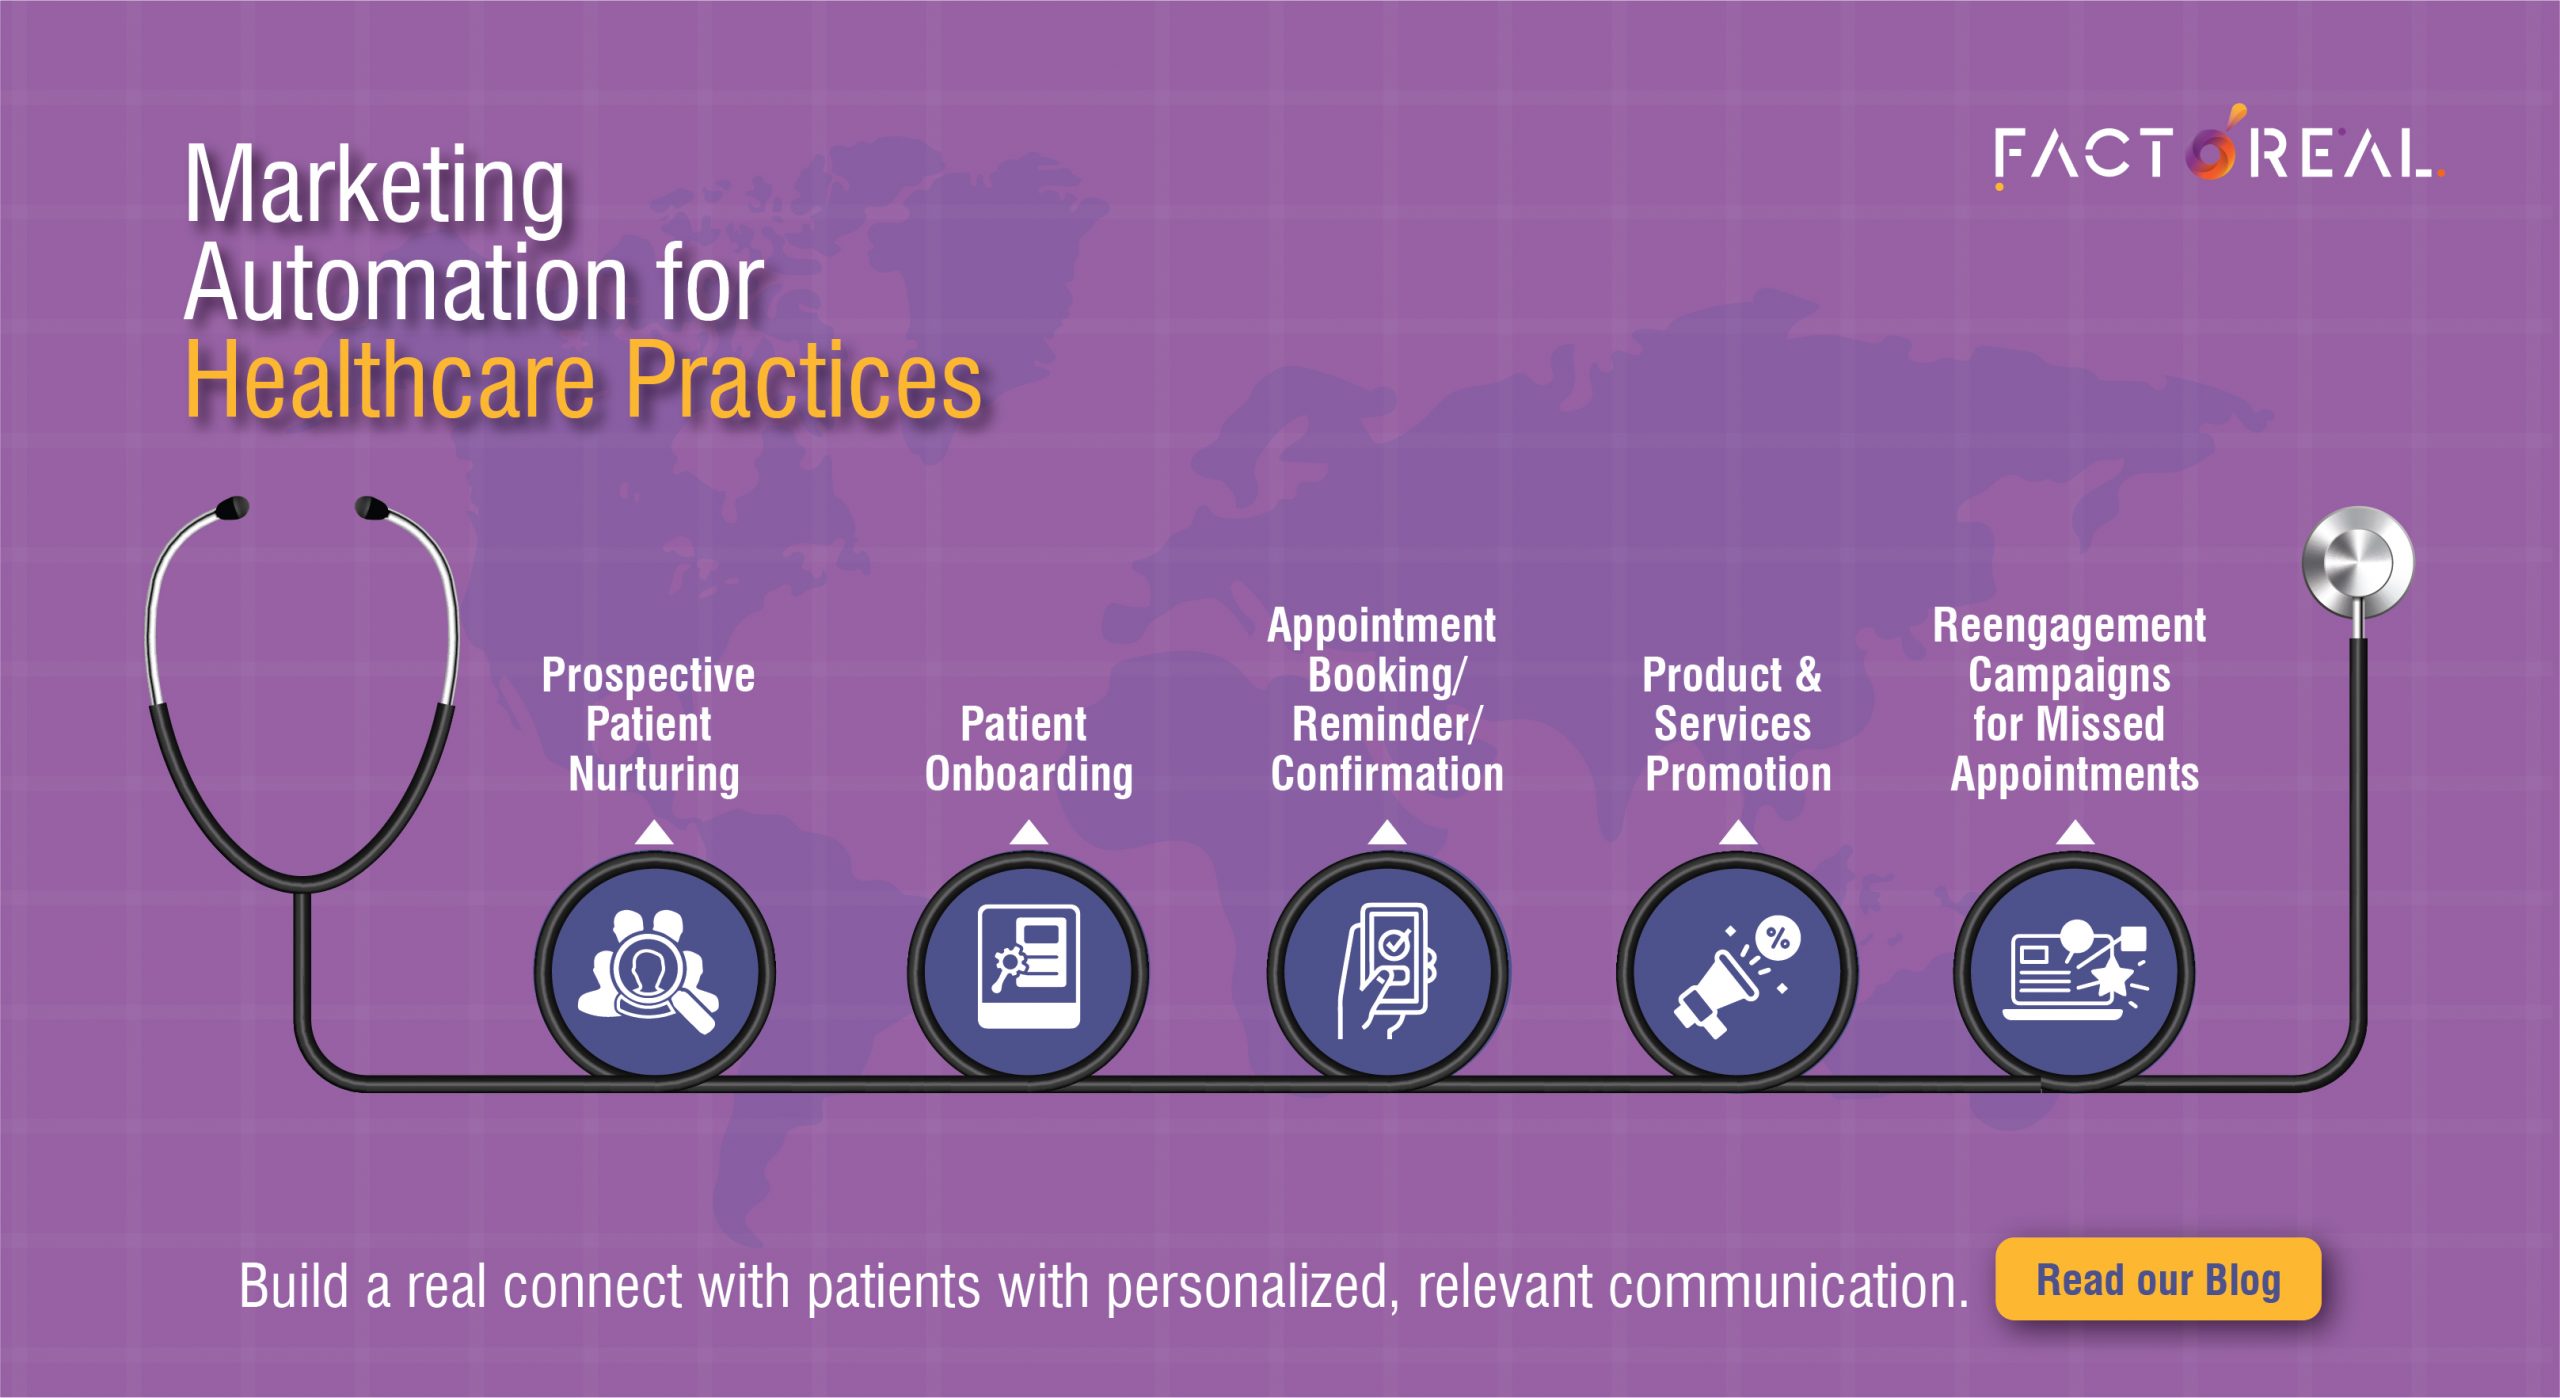 Marketing Automation is the Ideal Prescription for Patient Enrollment and Retention